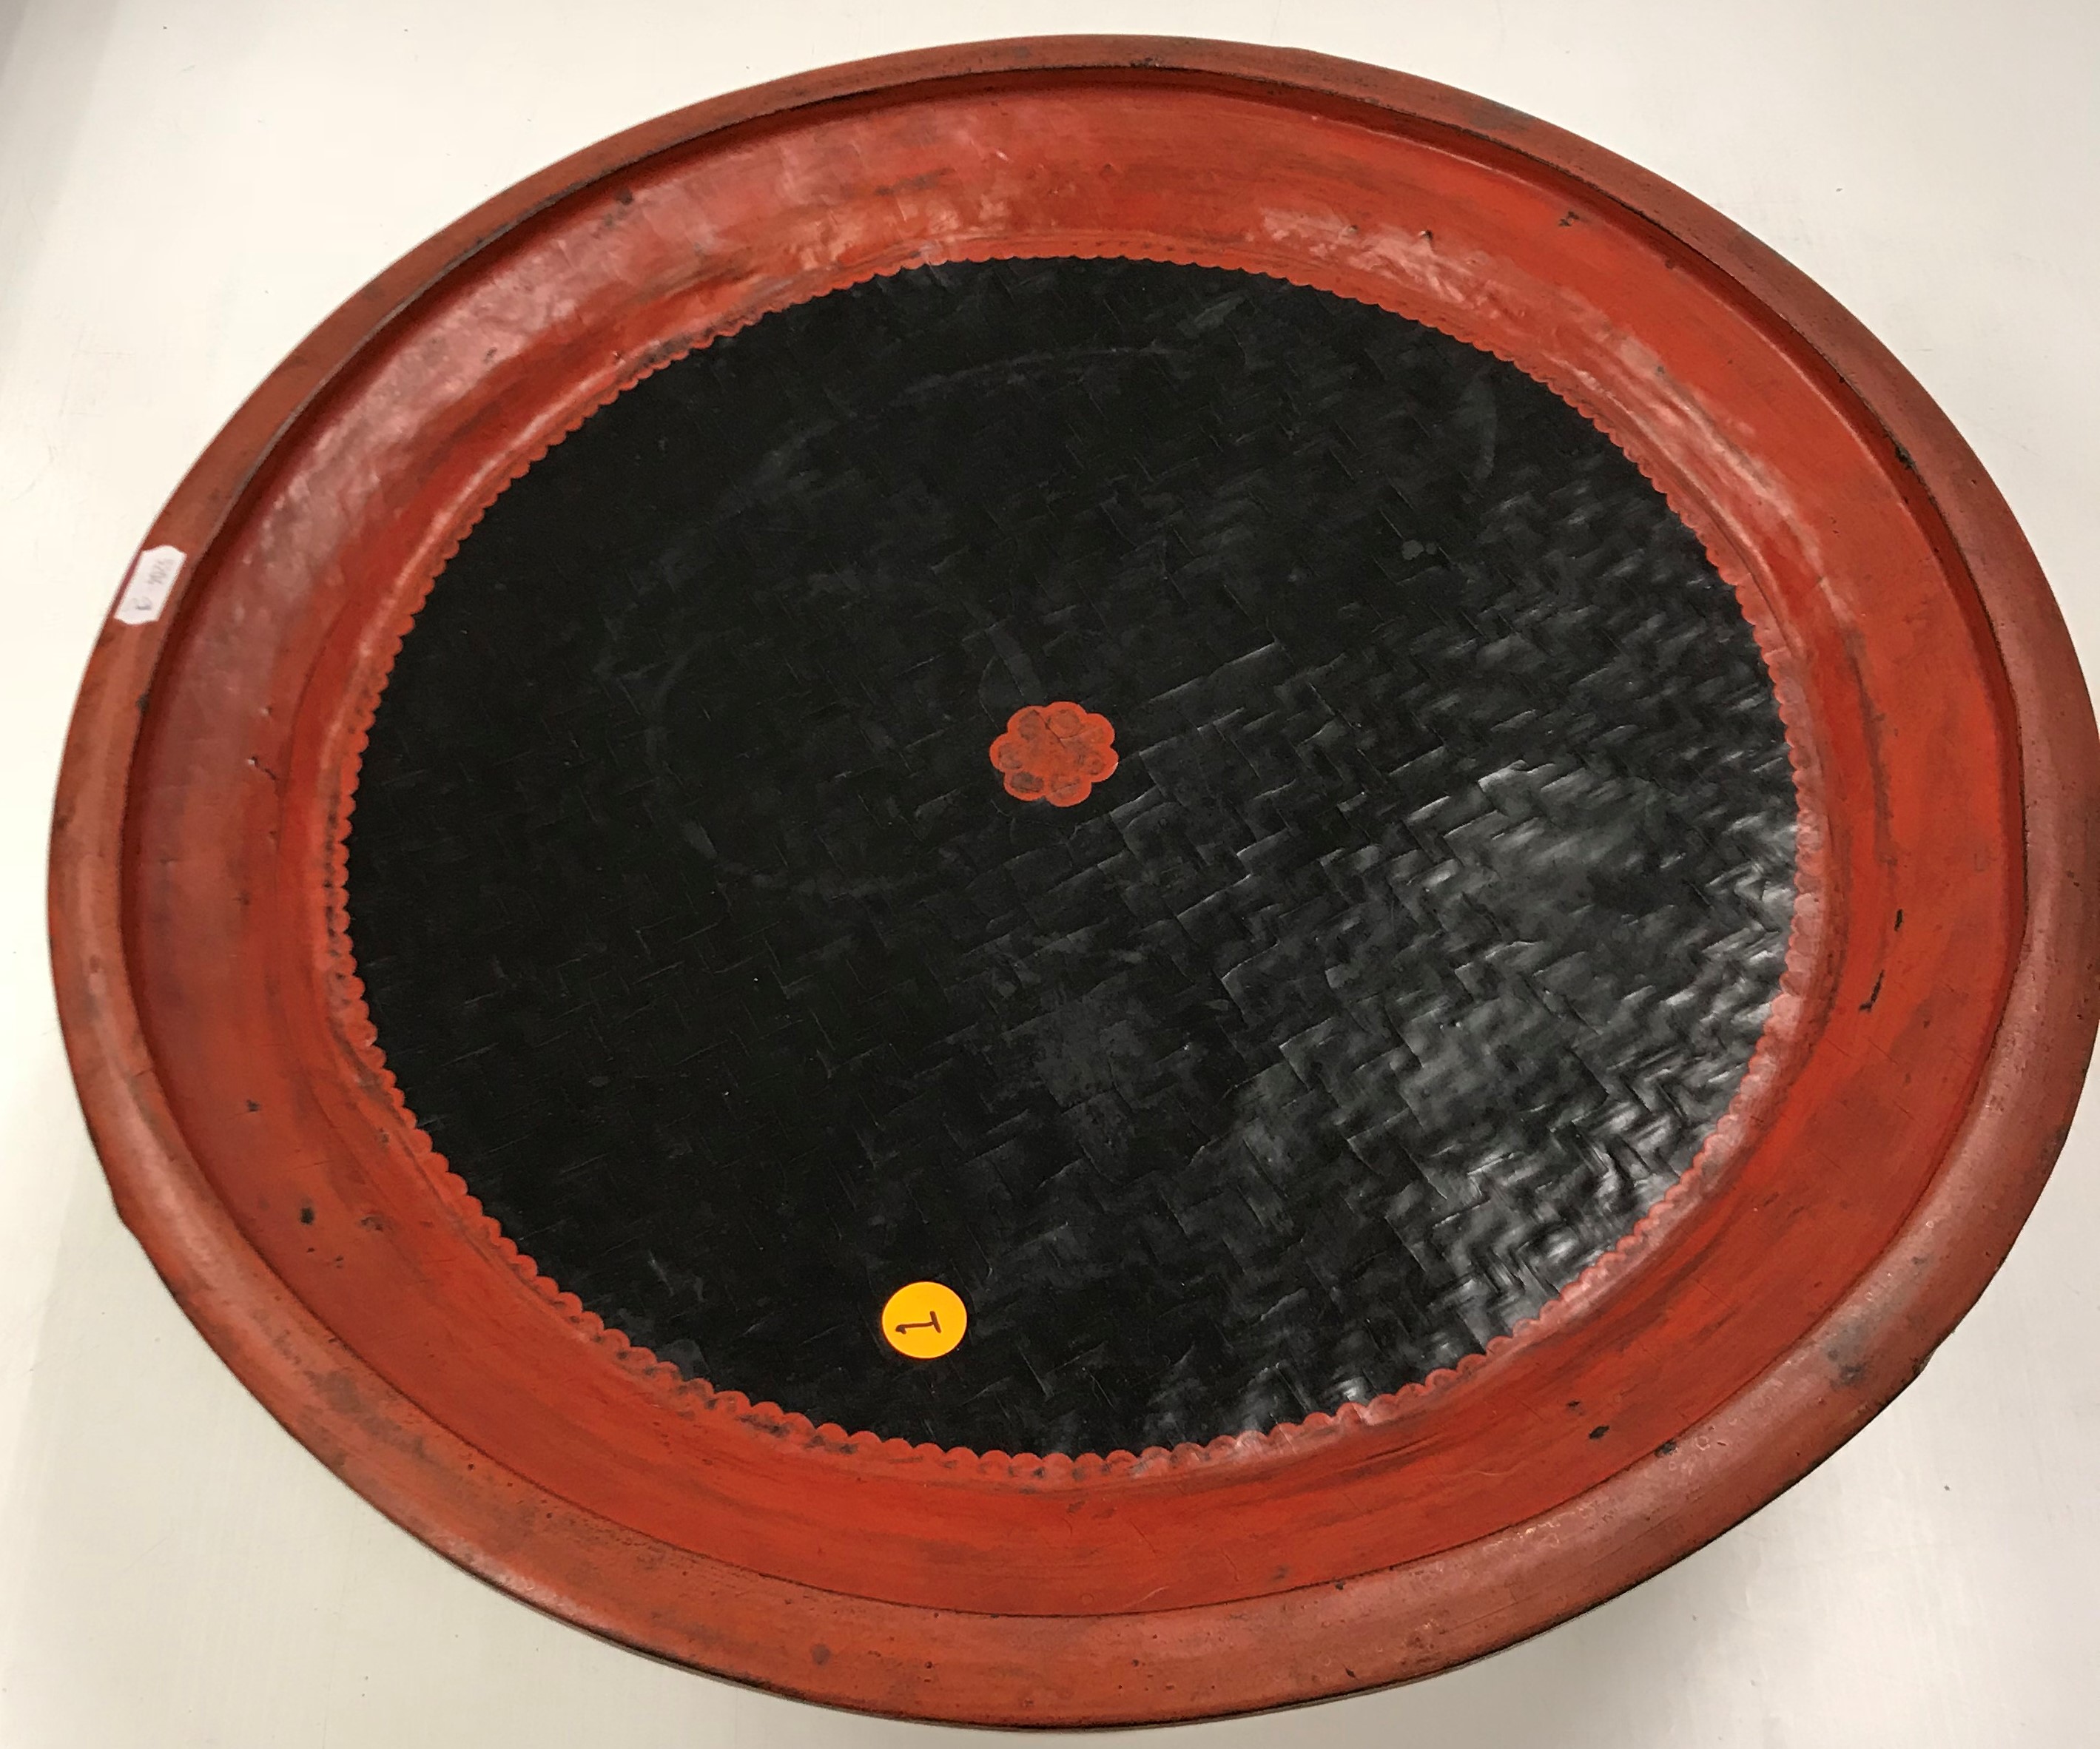 A Burmese lacquered Duang-Lan table (possibly from Kyauk-Ka) in red and black lacquer with - Image 2 of 2